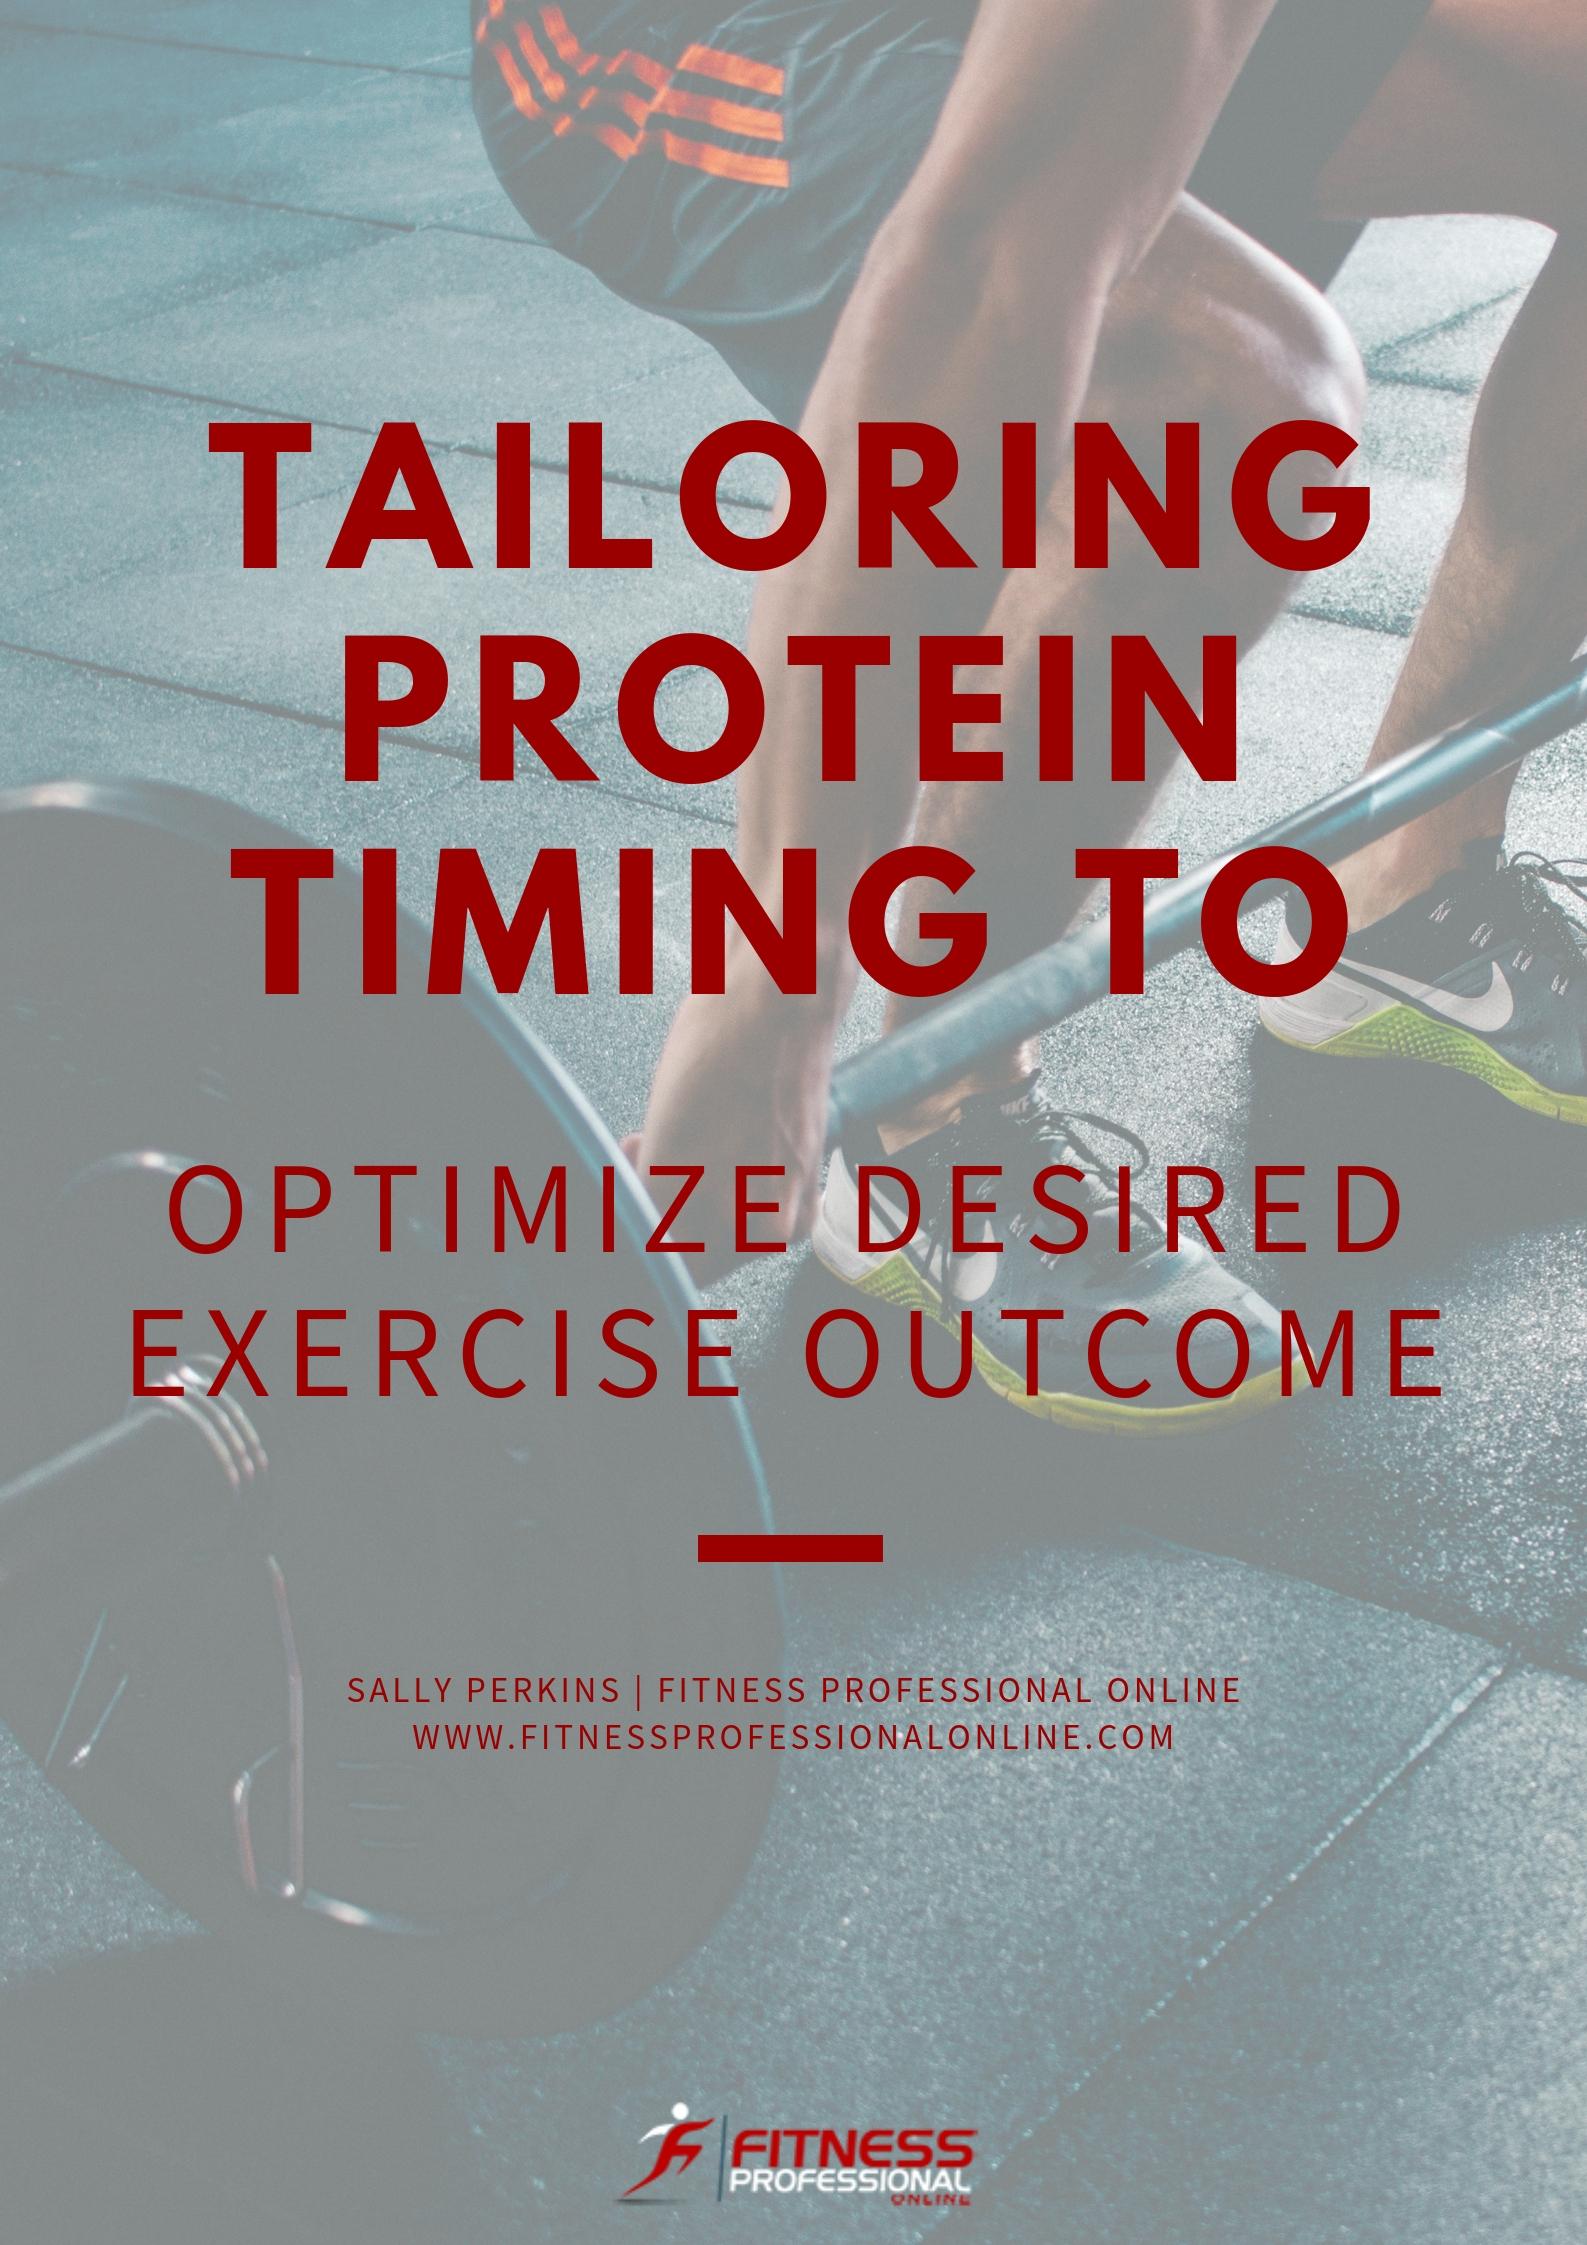 Sensible protein consumption is, without any doubt, one of the best ways to get the most out of every single exercise session.